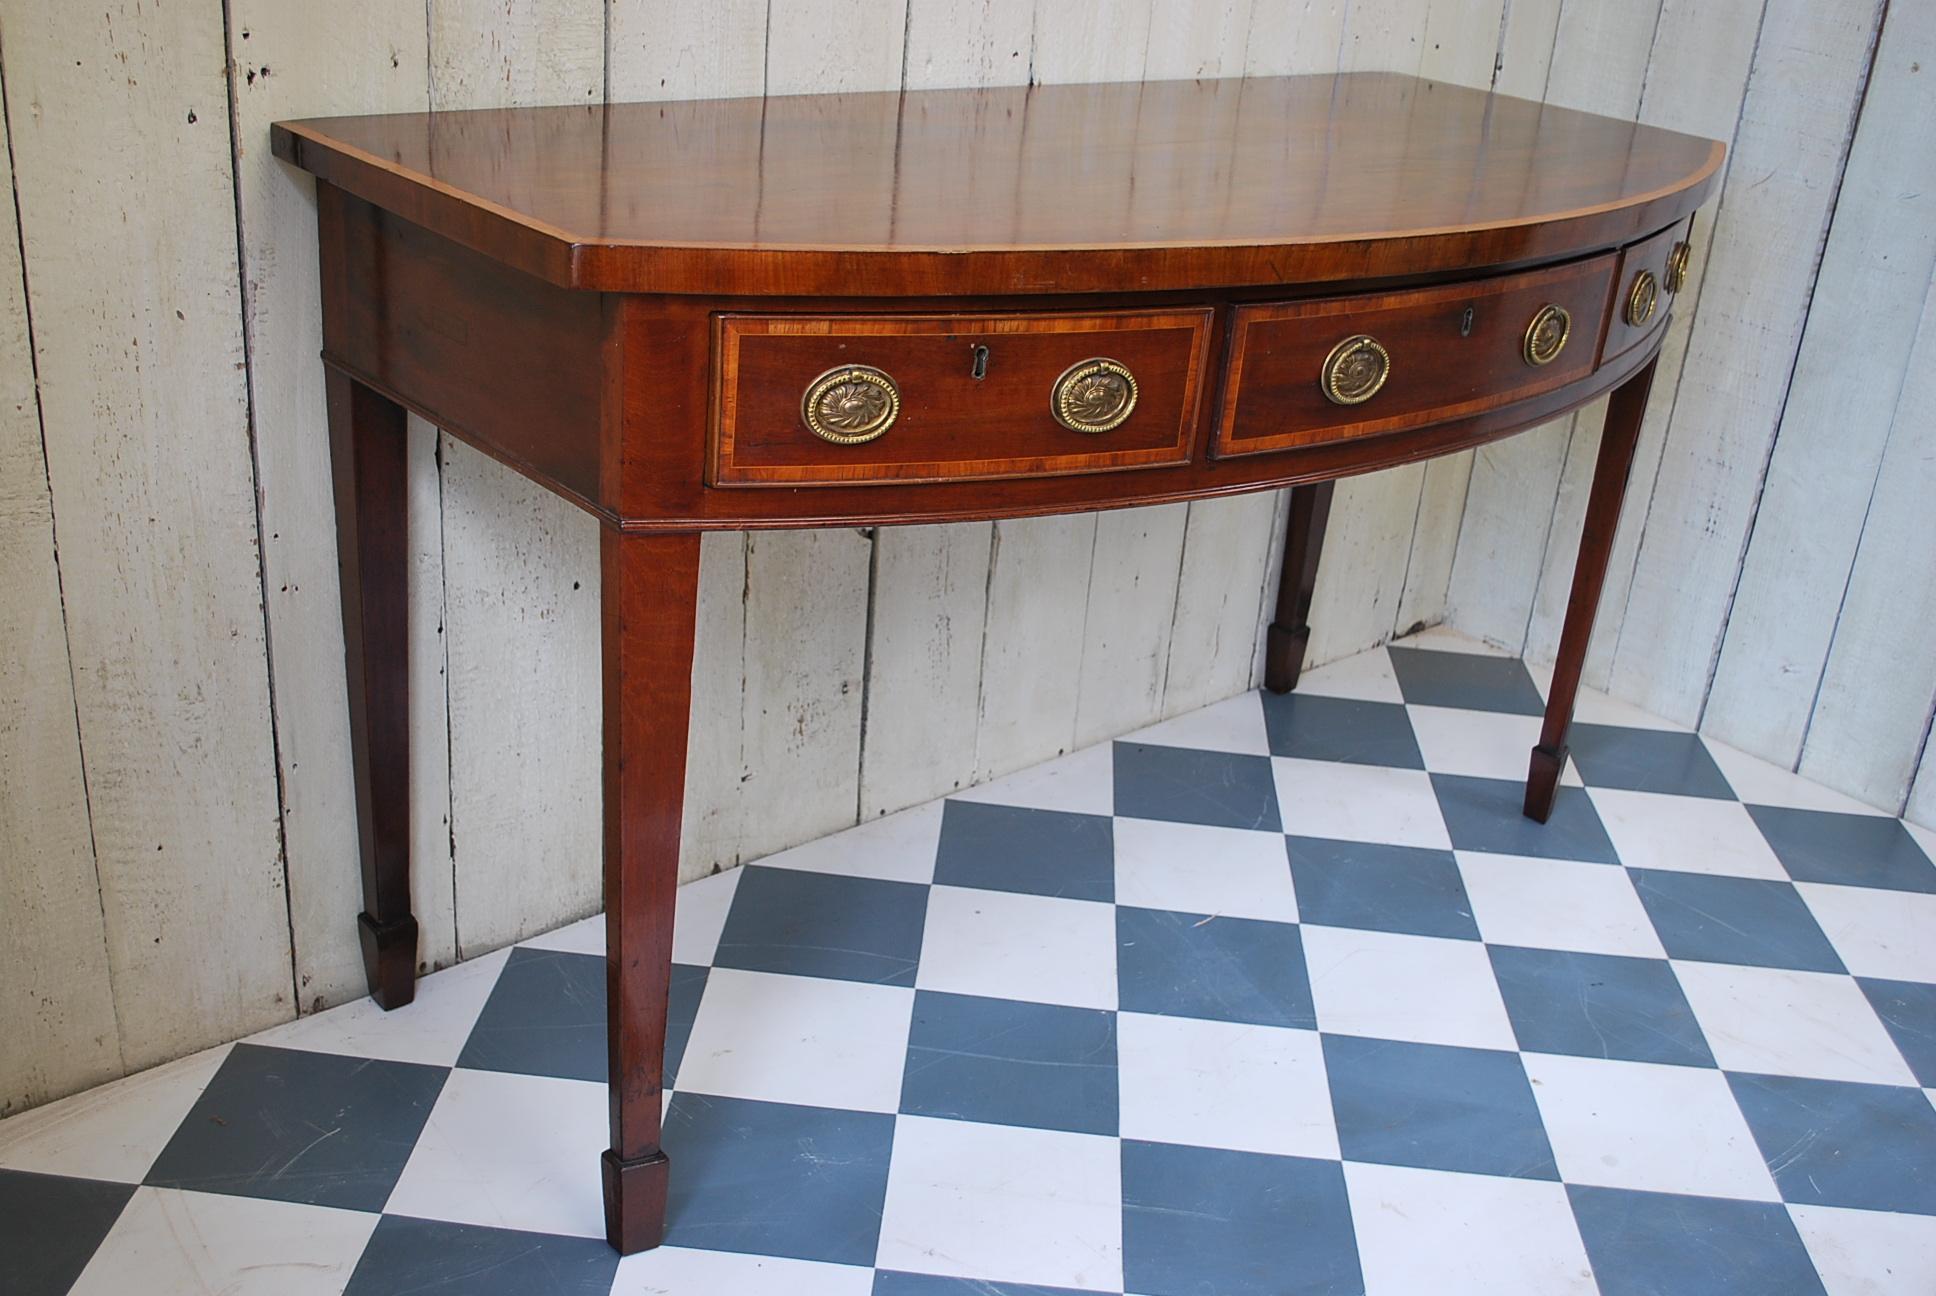 Beautiful mahogany Sheraton period bow front serving table/hall table, of excellent proportions. Standing on tapered legs with spade feet, cross banded in contrasting satin wood. The drawers have original oak linings and gilded brass period